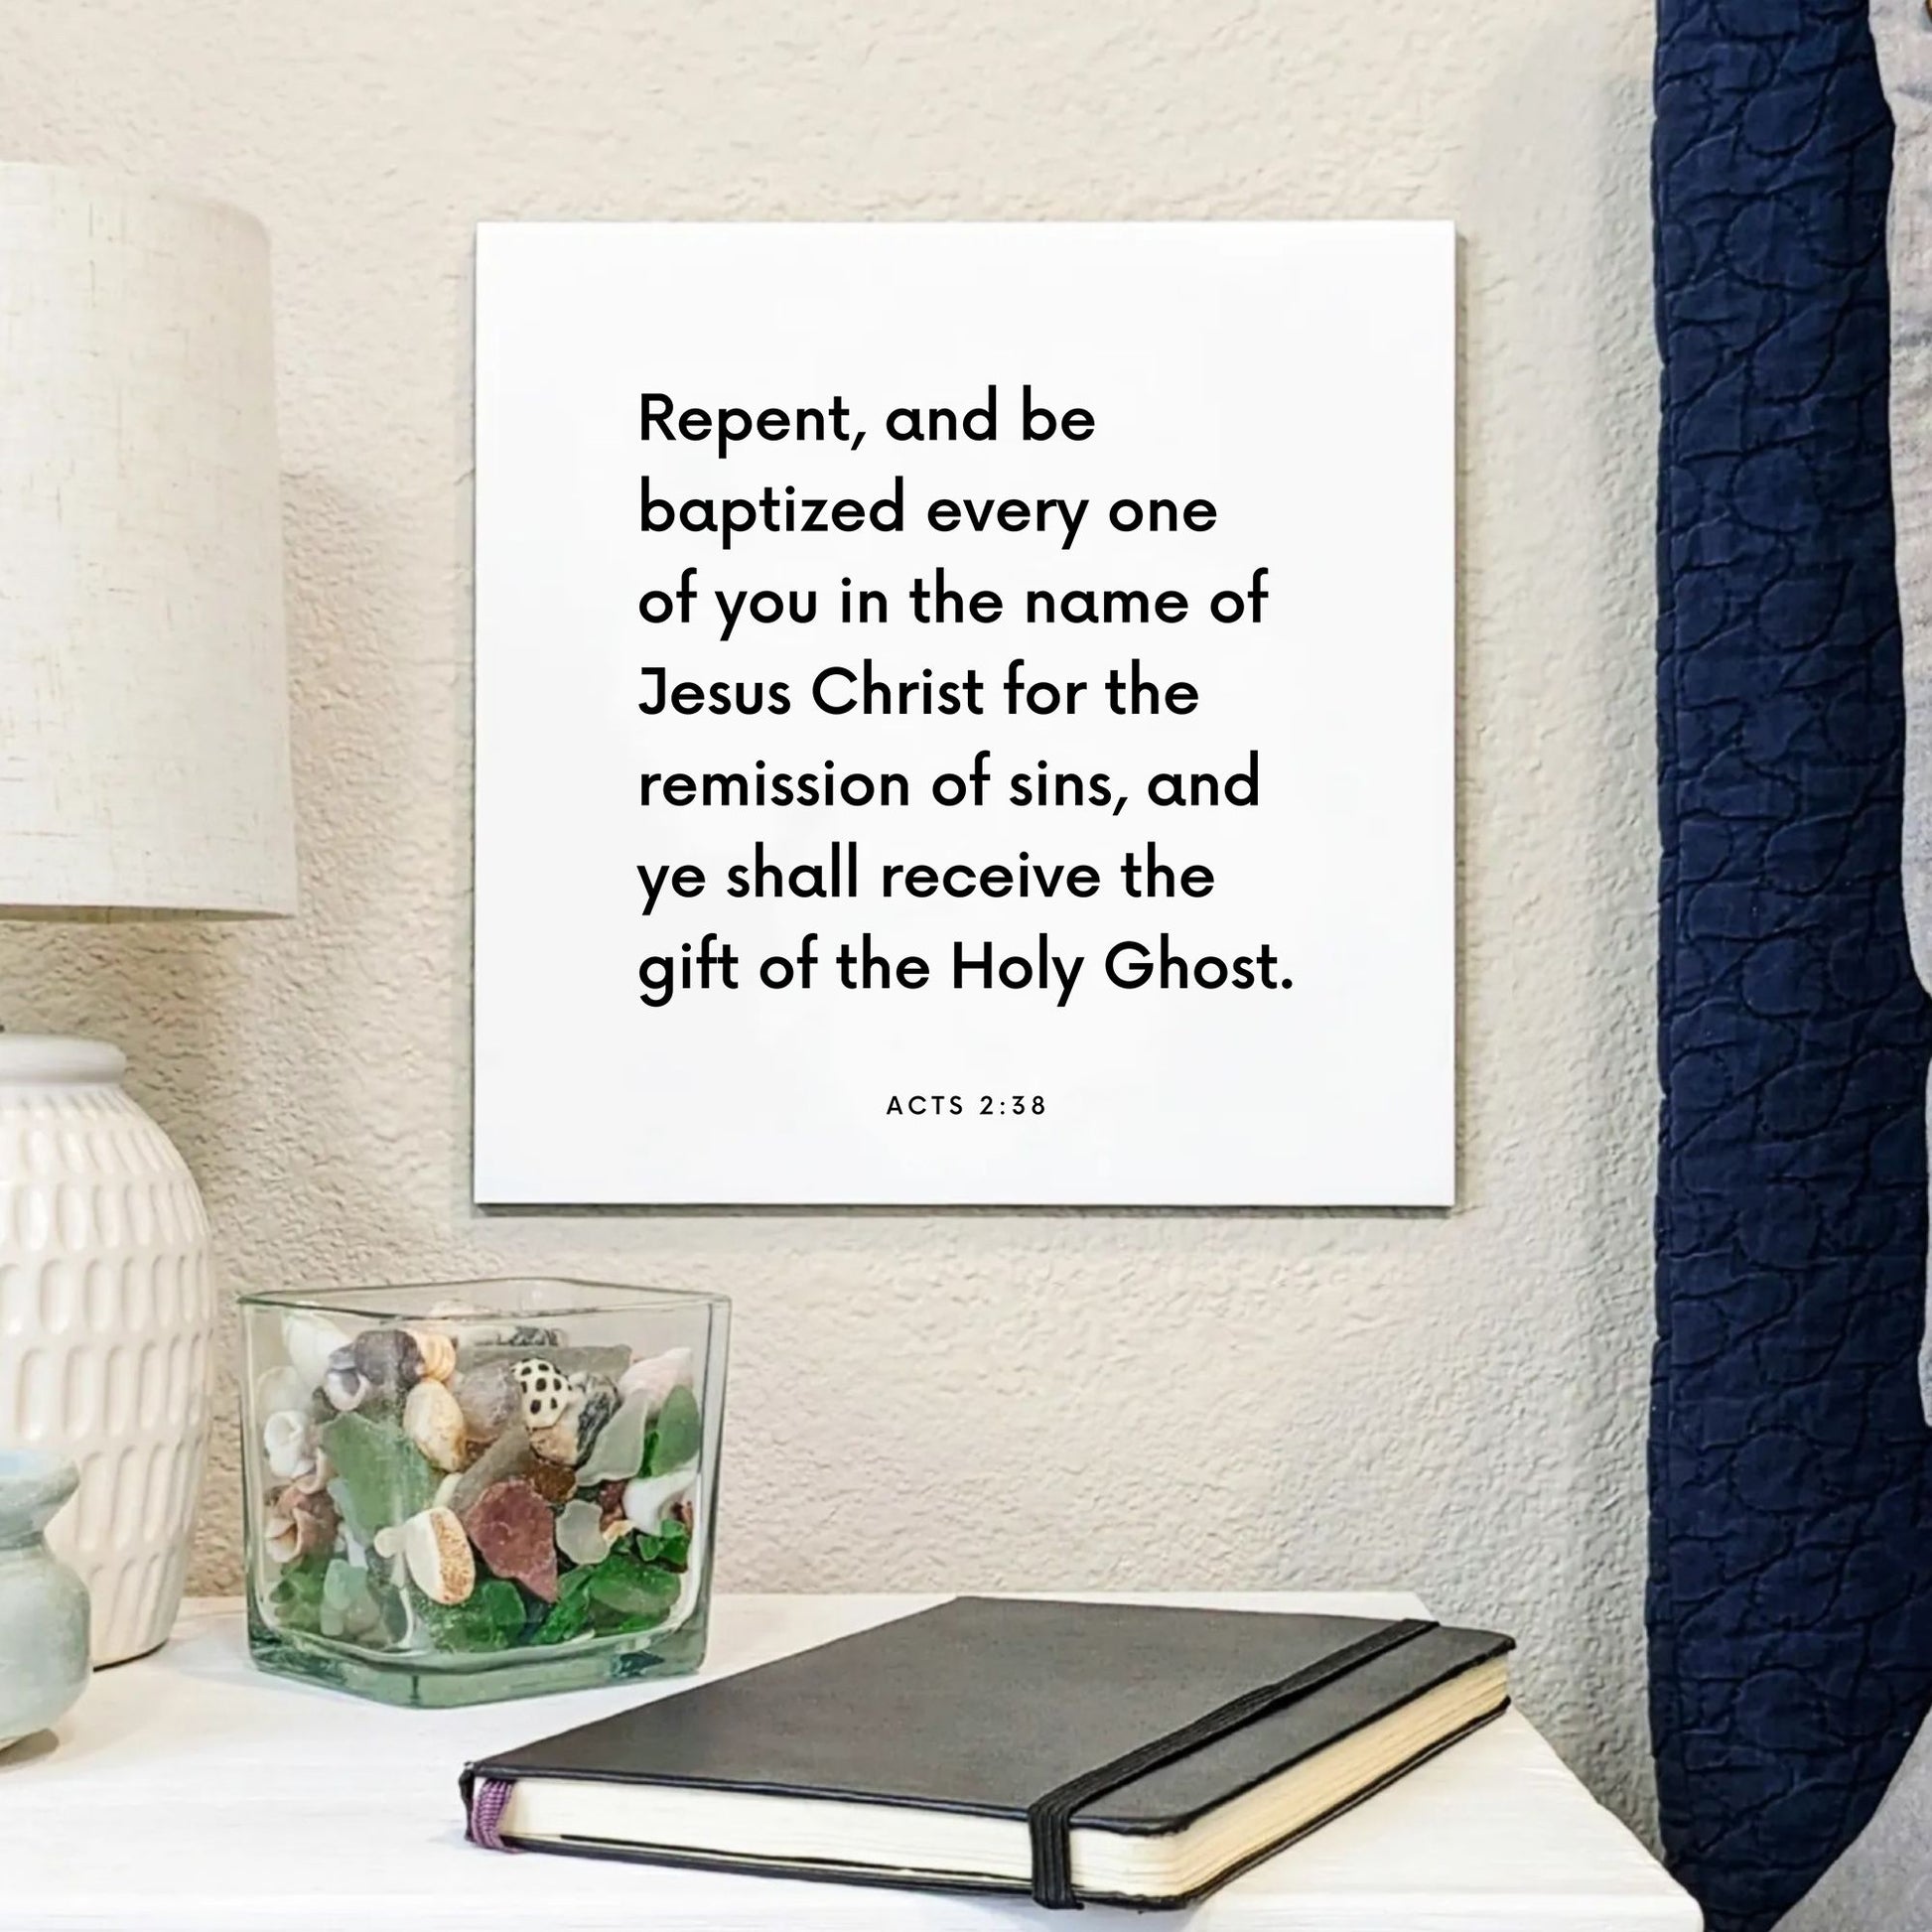 Bedside mouting of the scripture tile for Acts 2:38 - "Repent, and be baptized every one of you"